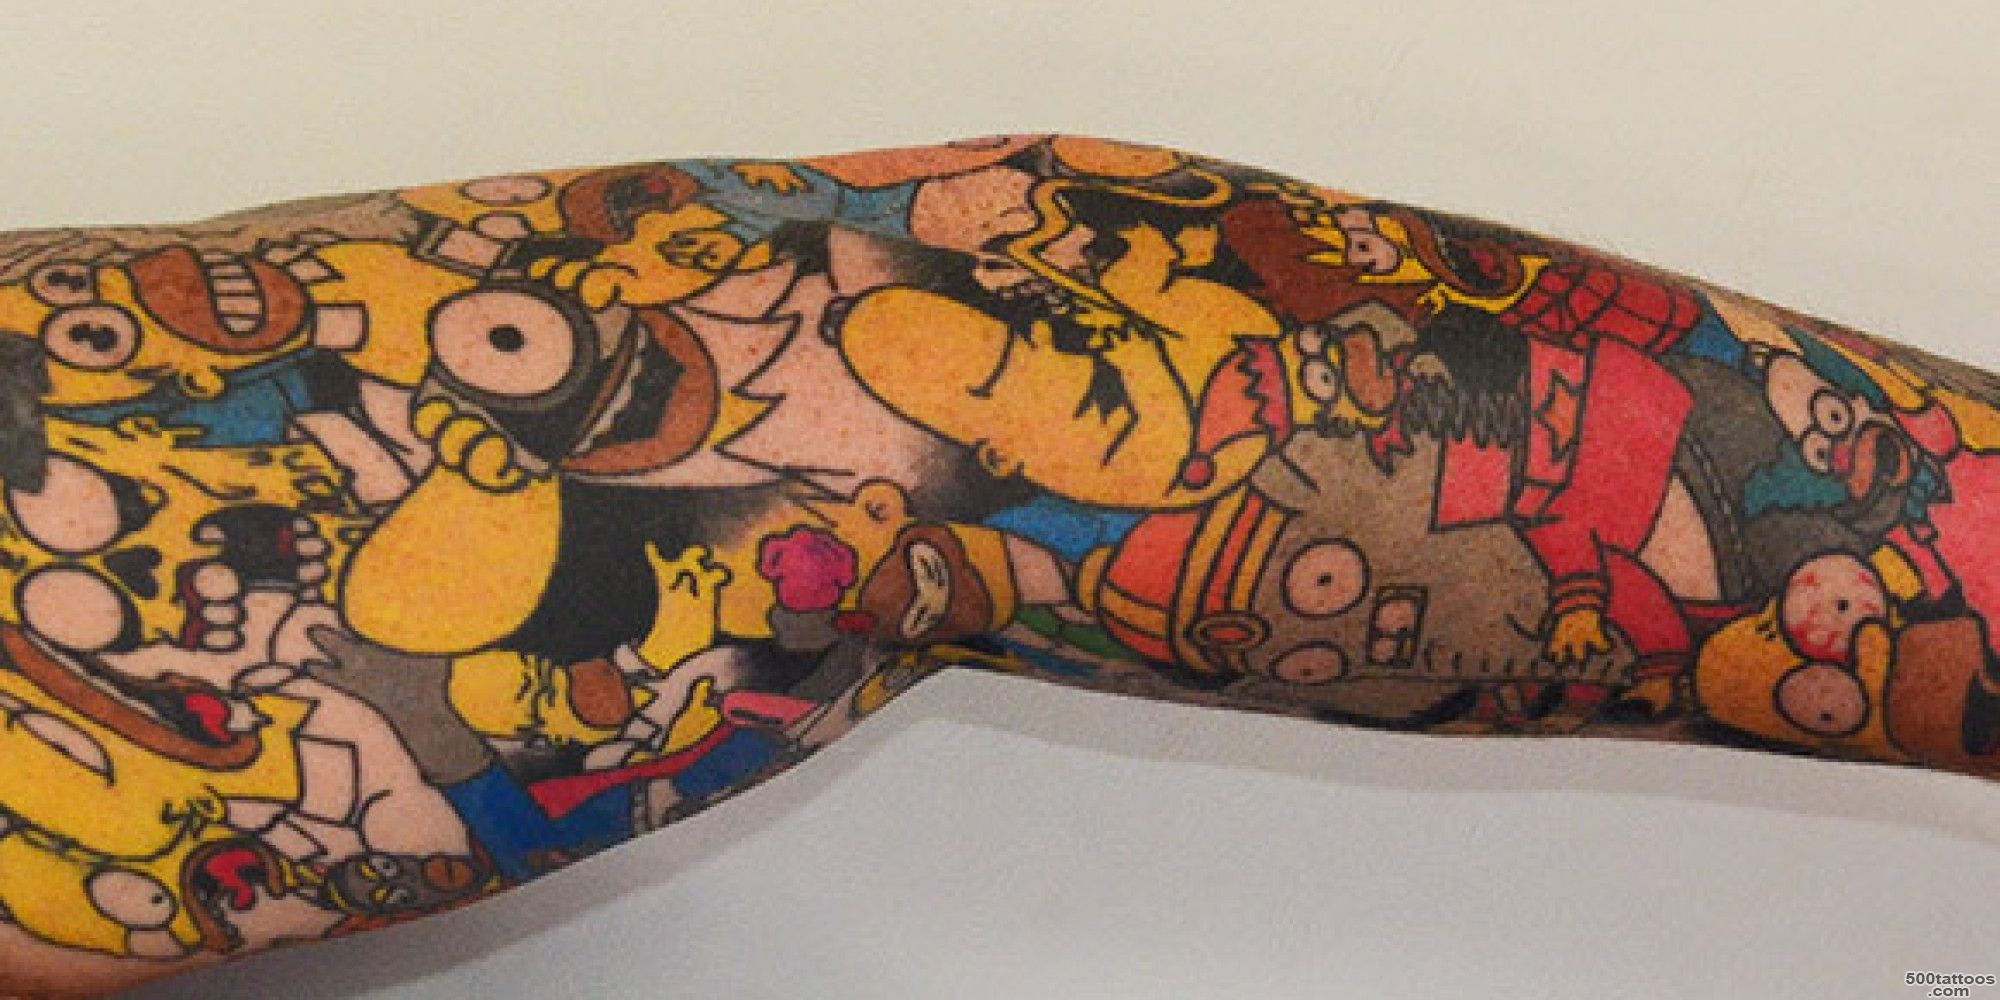 Man Sets World Record With Most Homer Simpson Tattoos_23